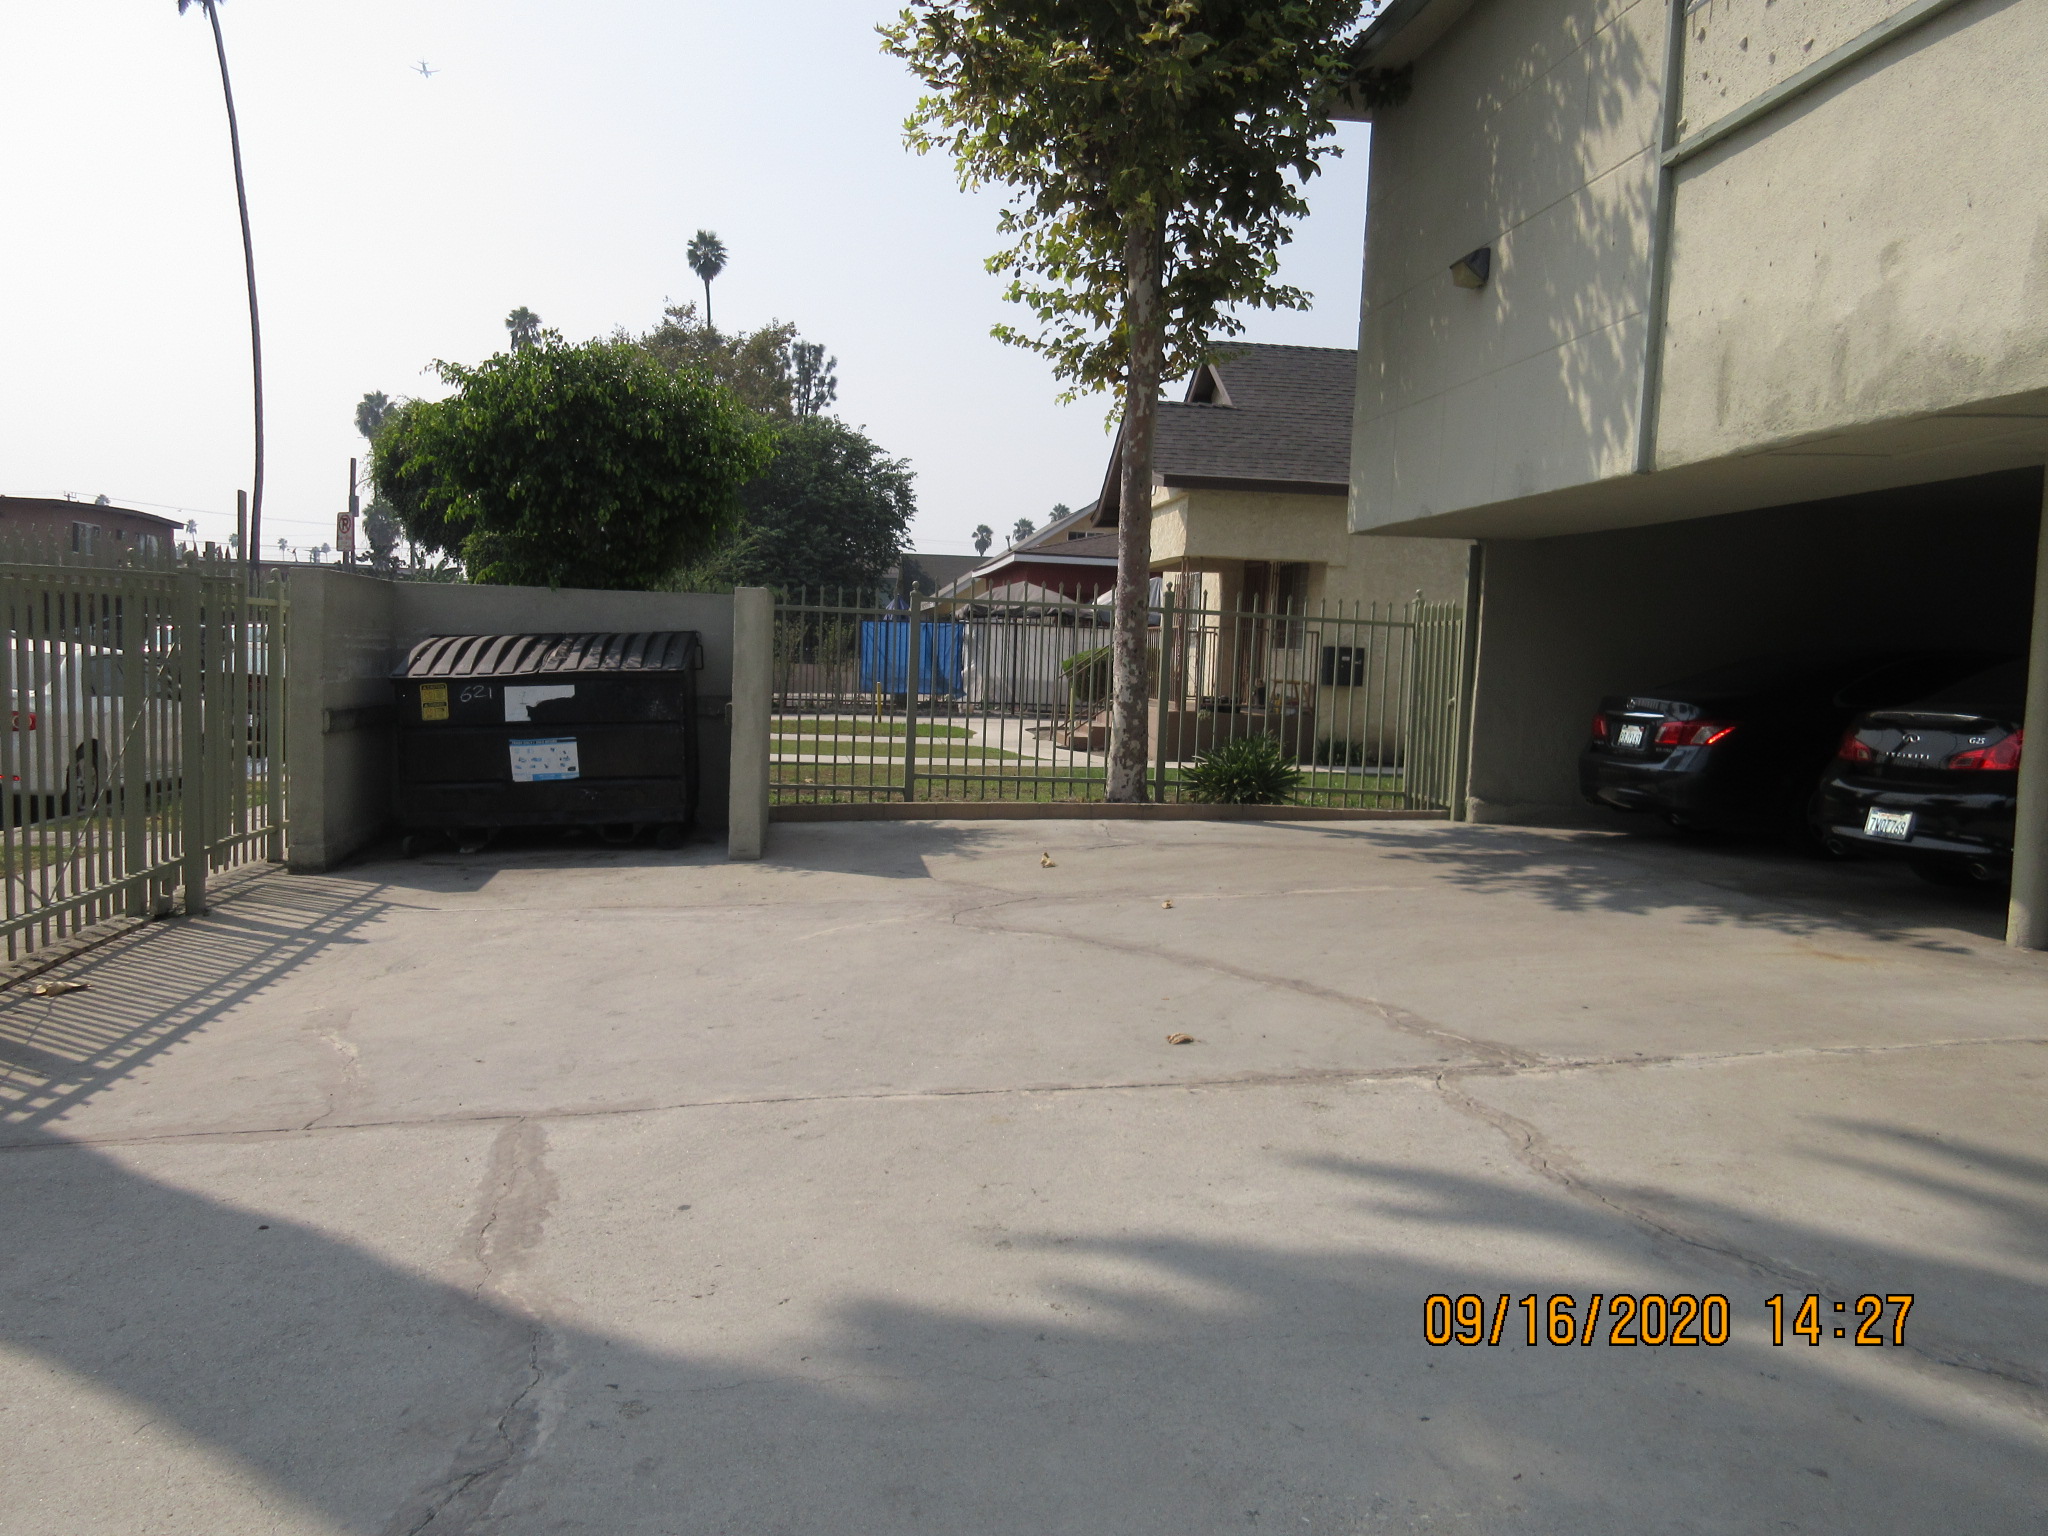 Image of the apartment back parking lot